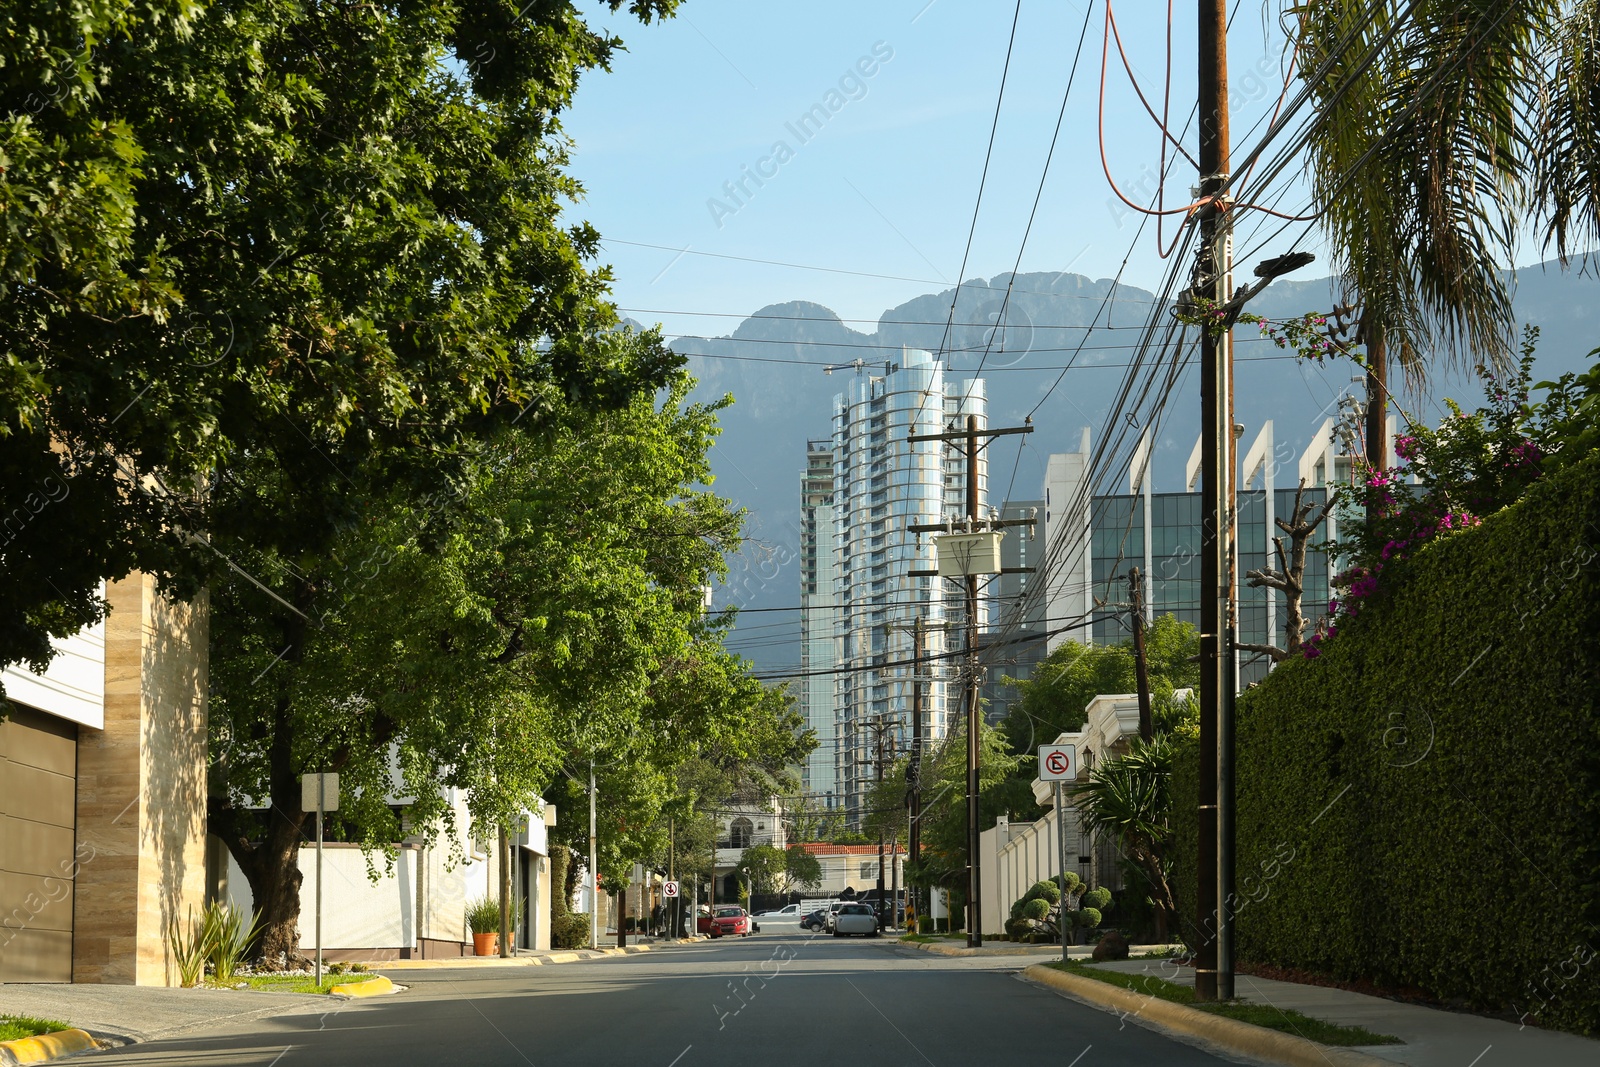 Photo of Picturesque view of mountains, city street with road and modern architecture